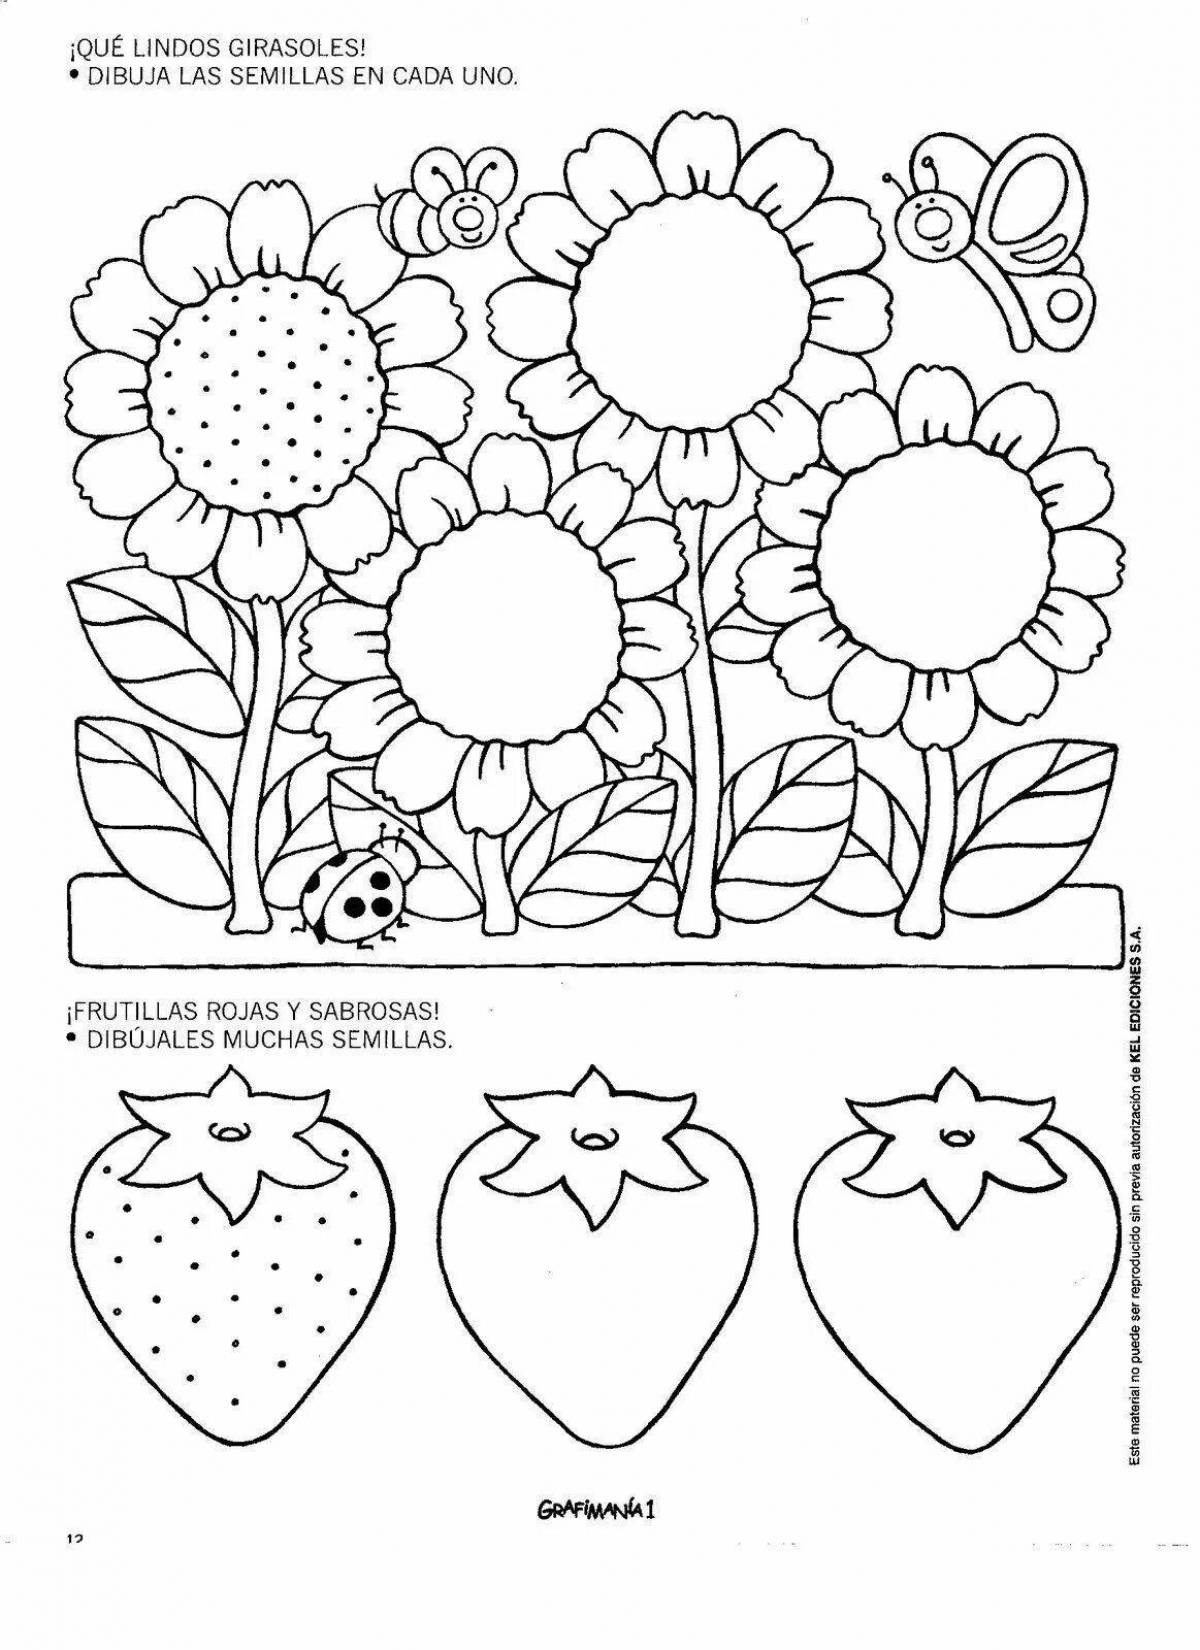 A fascinating coloring book for the development of fine motor skills in children 6-7 years old